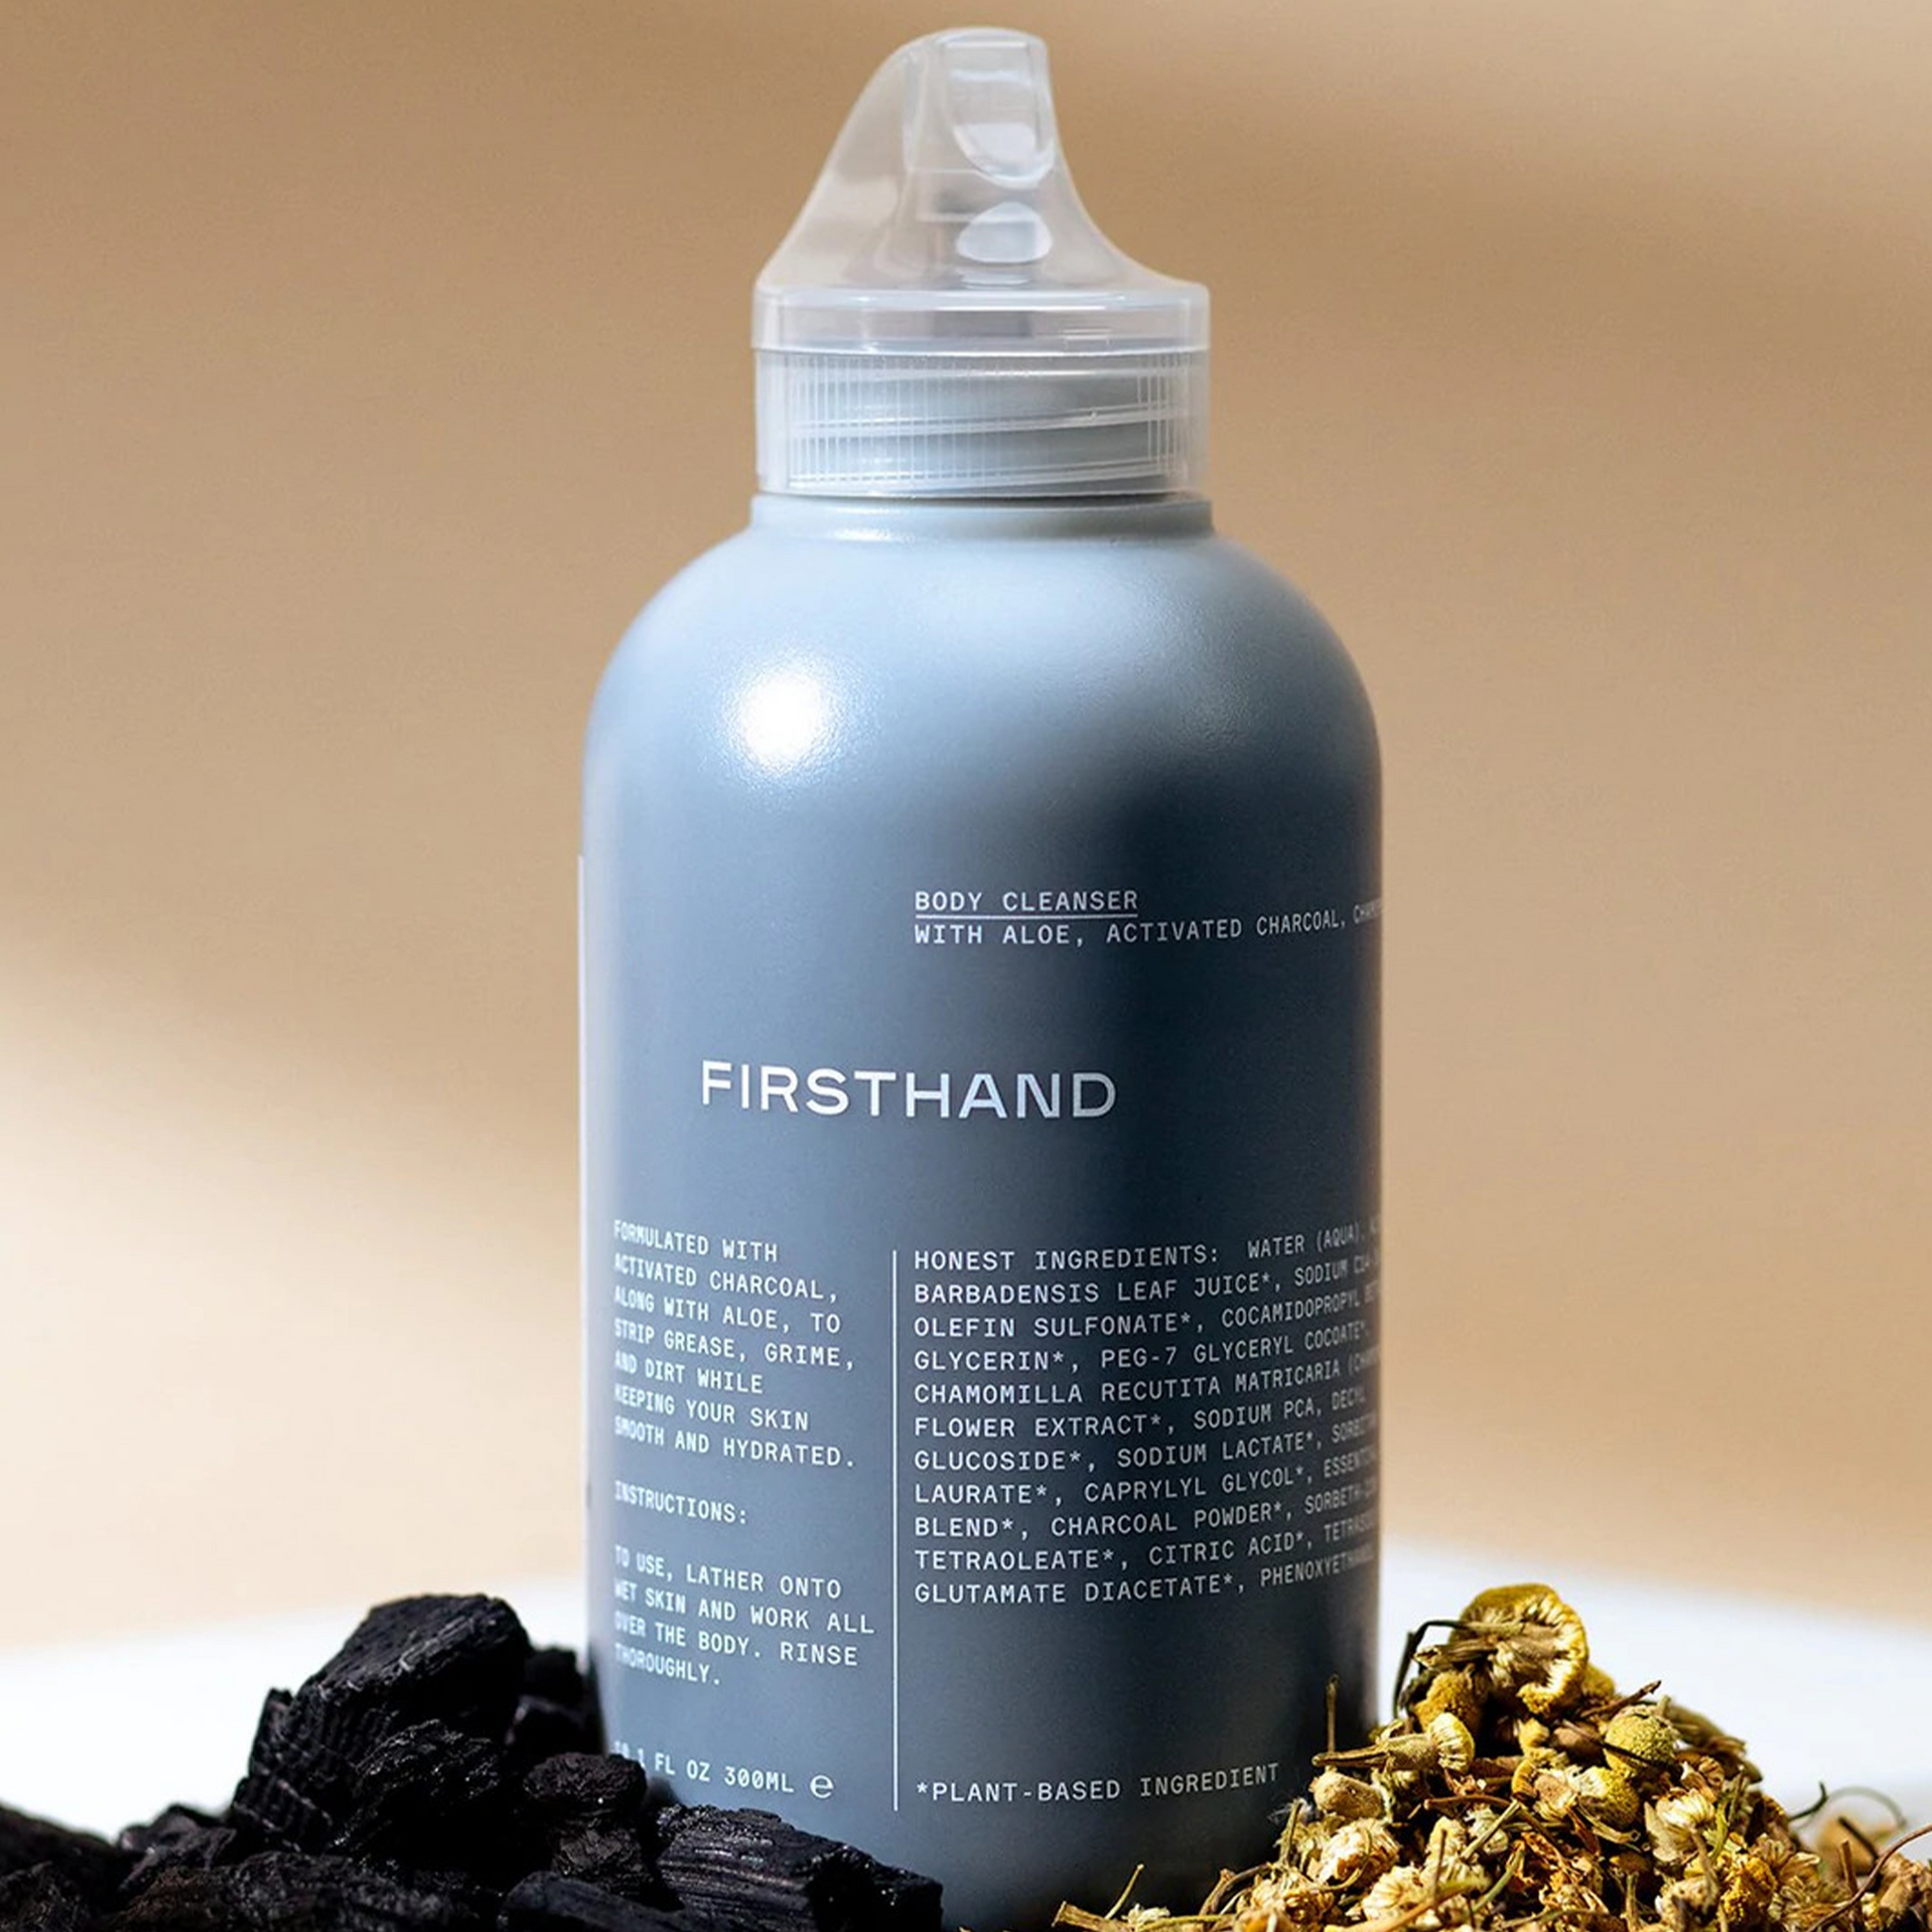 Firsthand Body Cleanser: A gentle yet thorough cleansing solution - this activated charcoal cleanser effectively strips away excess oils and dirt on the body while chamomile extract and aloe vera soften and soothe the skin to leave you feeling revived and refreshed.